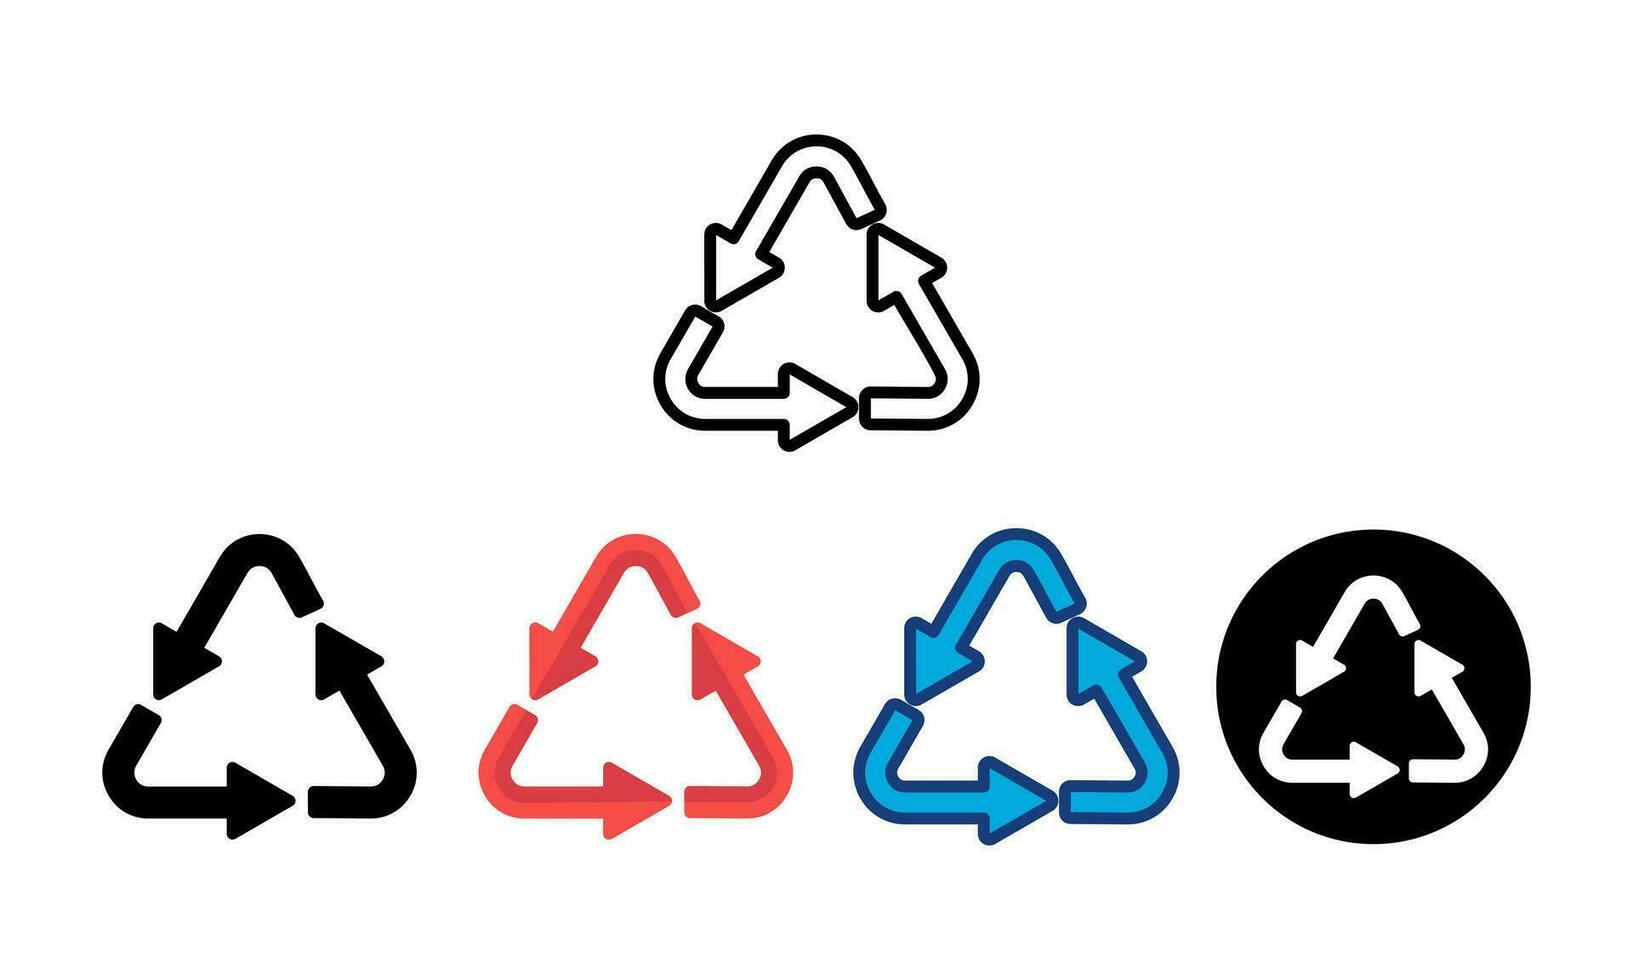 Recycling arrow vector icon set on white background. with various styles. arrow icon for your web site design, logo, app, UI. arrows indicate direction symbols. curved arrow.